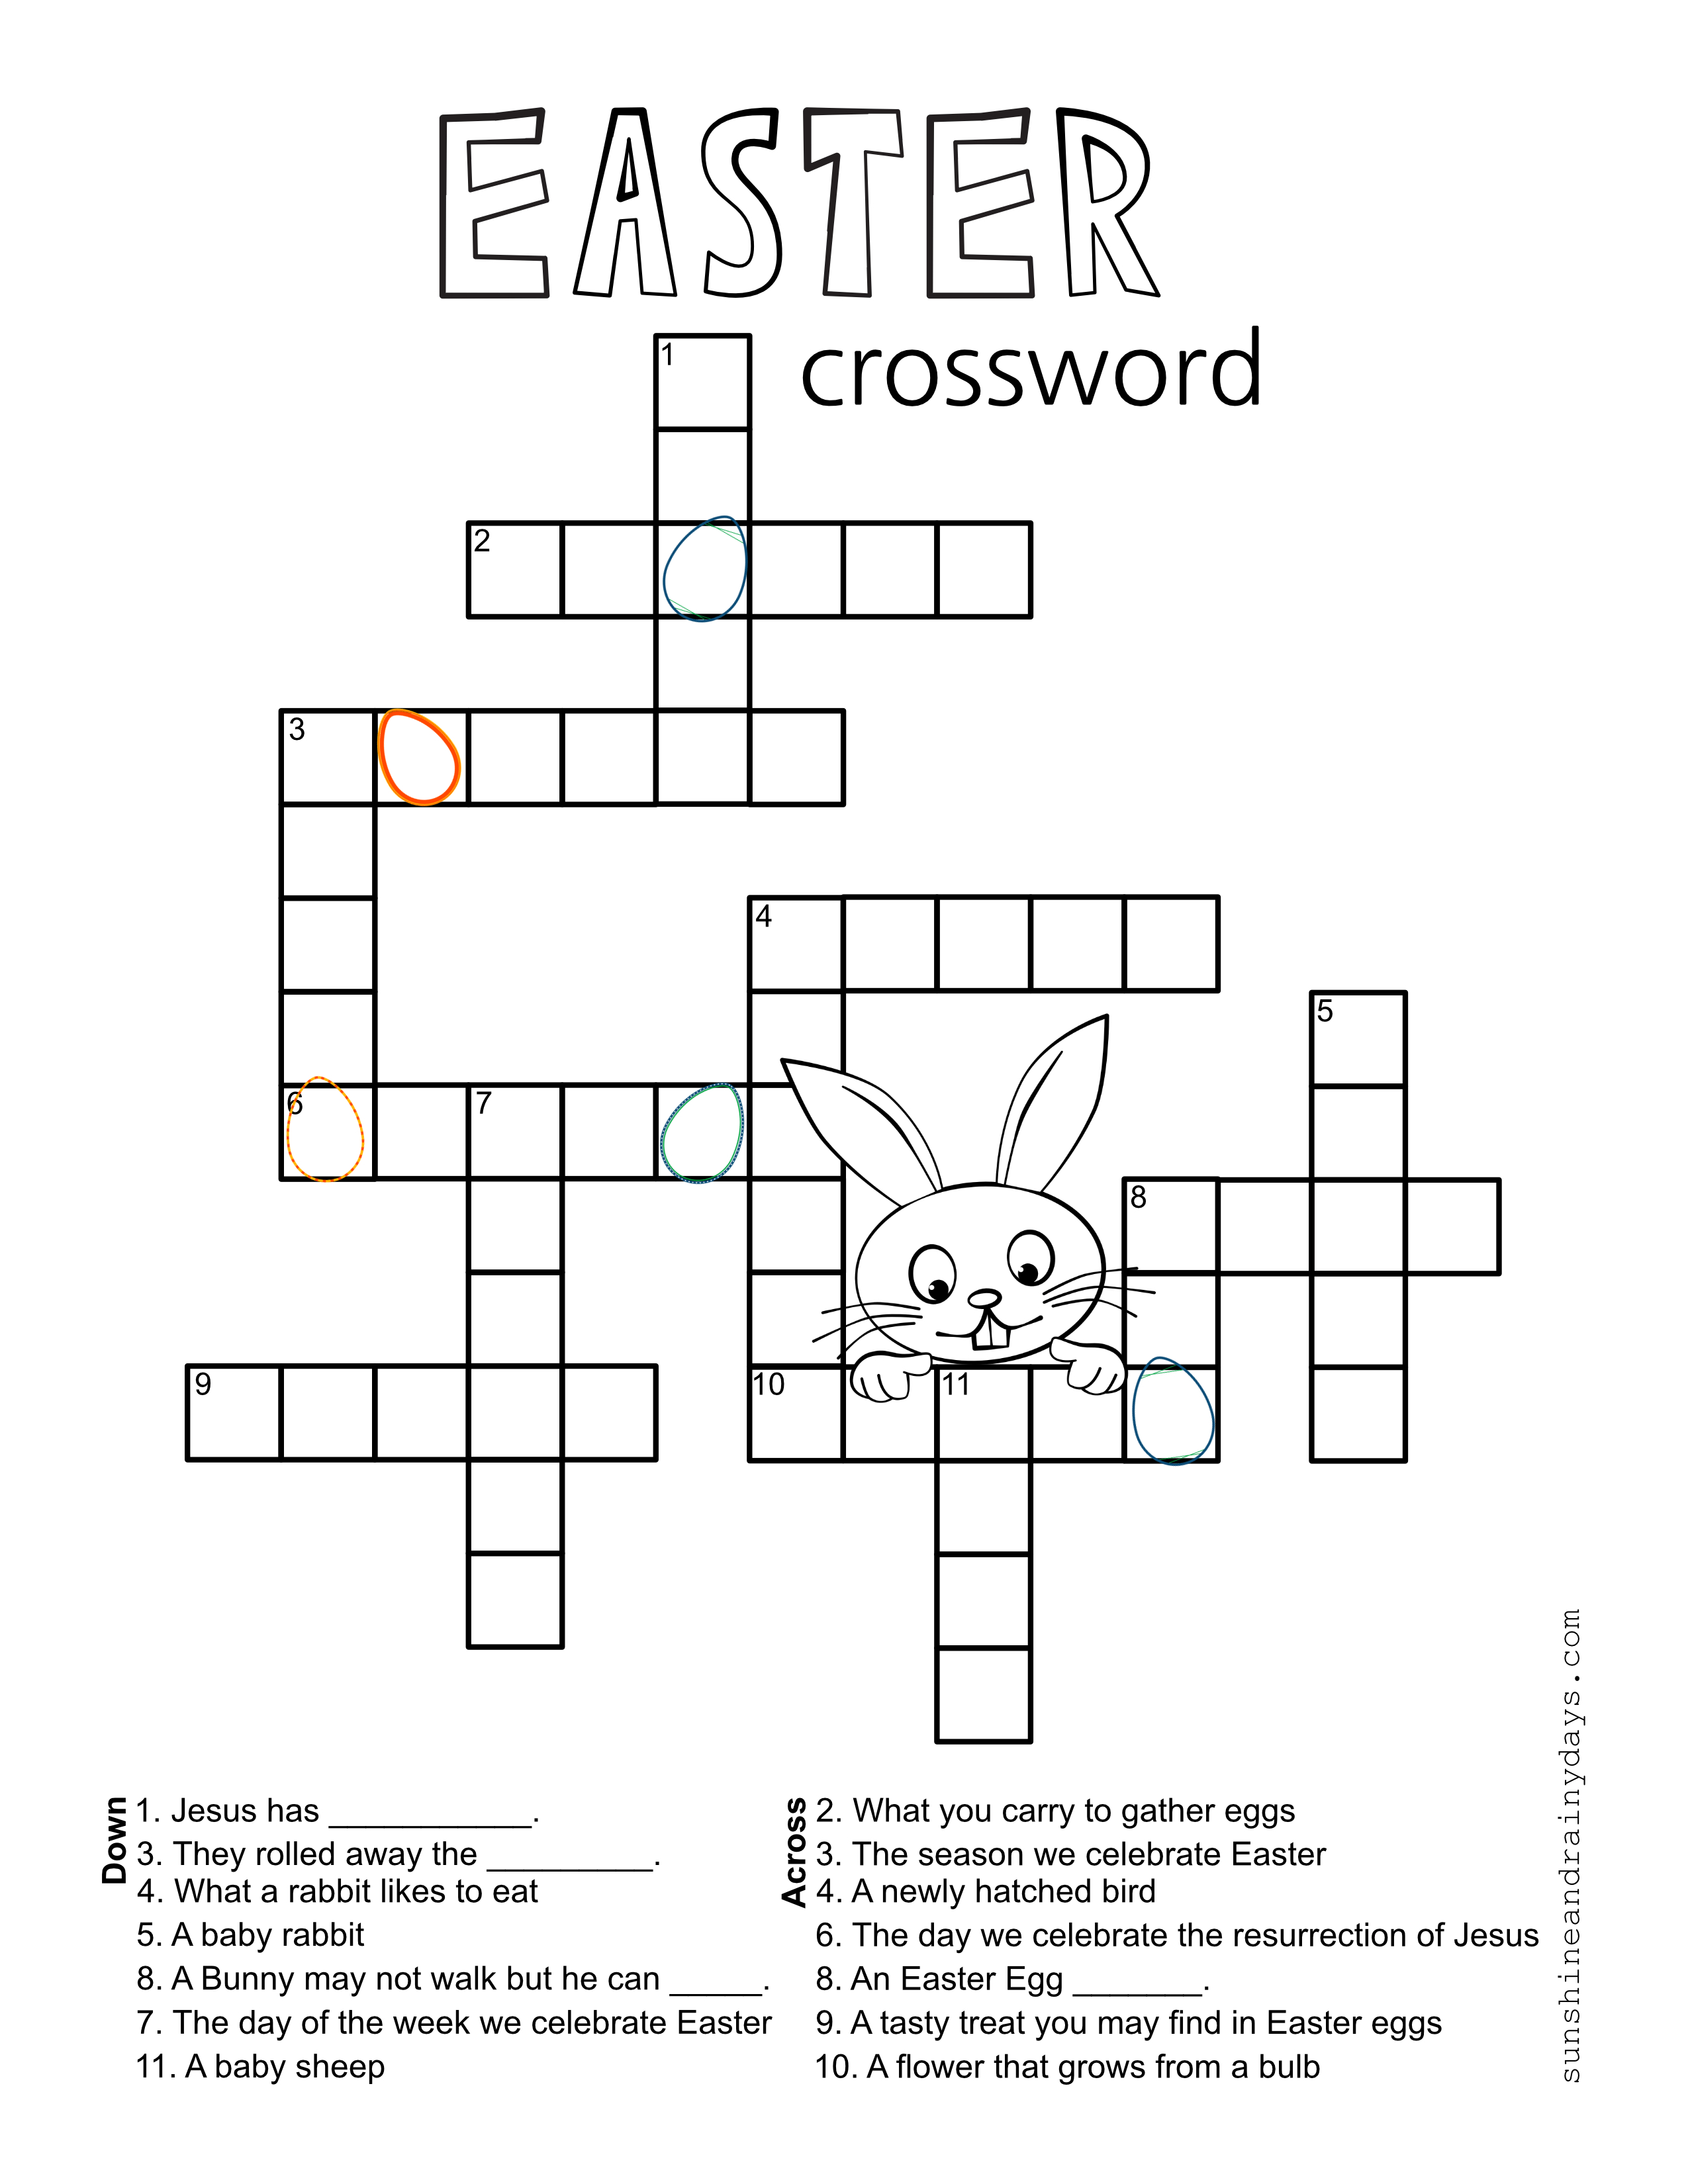 Easter Crossword Puzzle - Sunshine And Rainy Days - Printable Crossword Puzzles For Easter